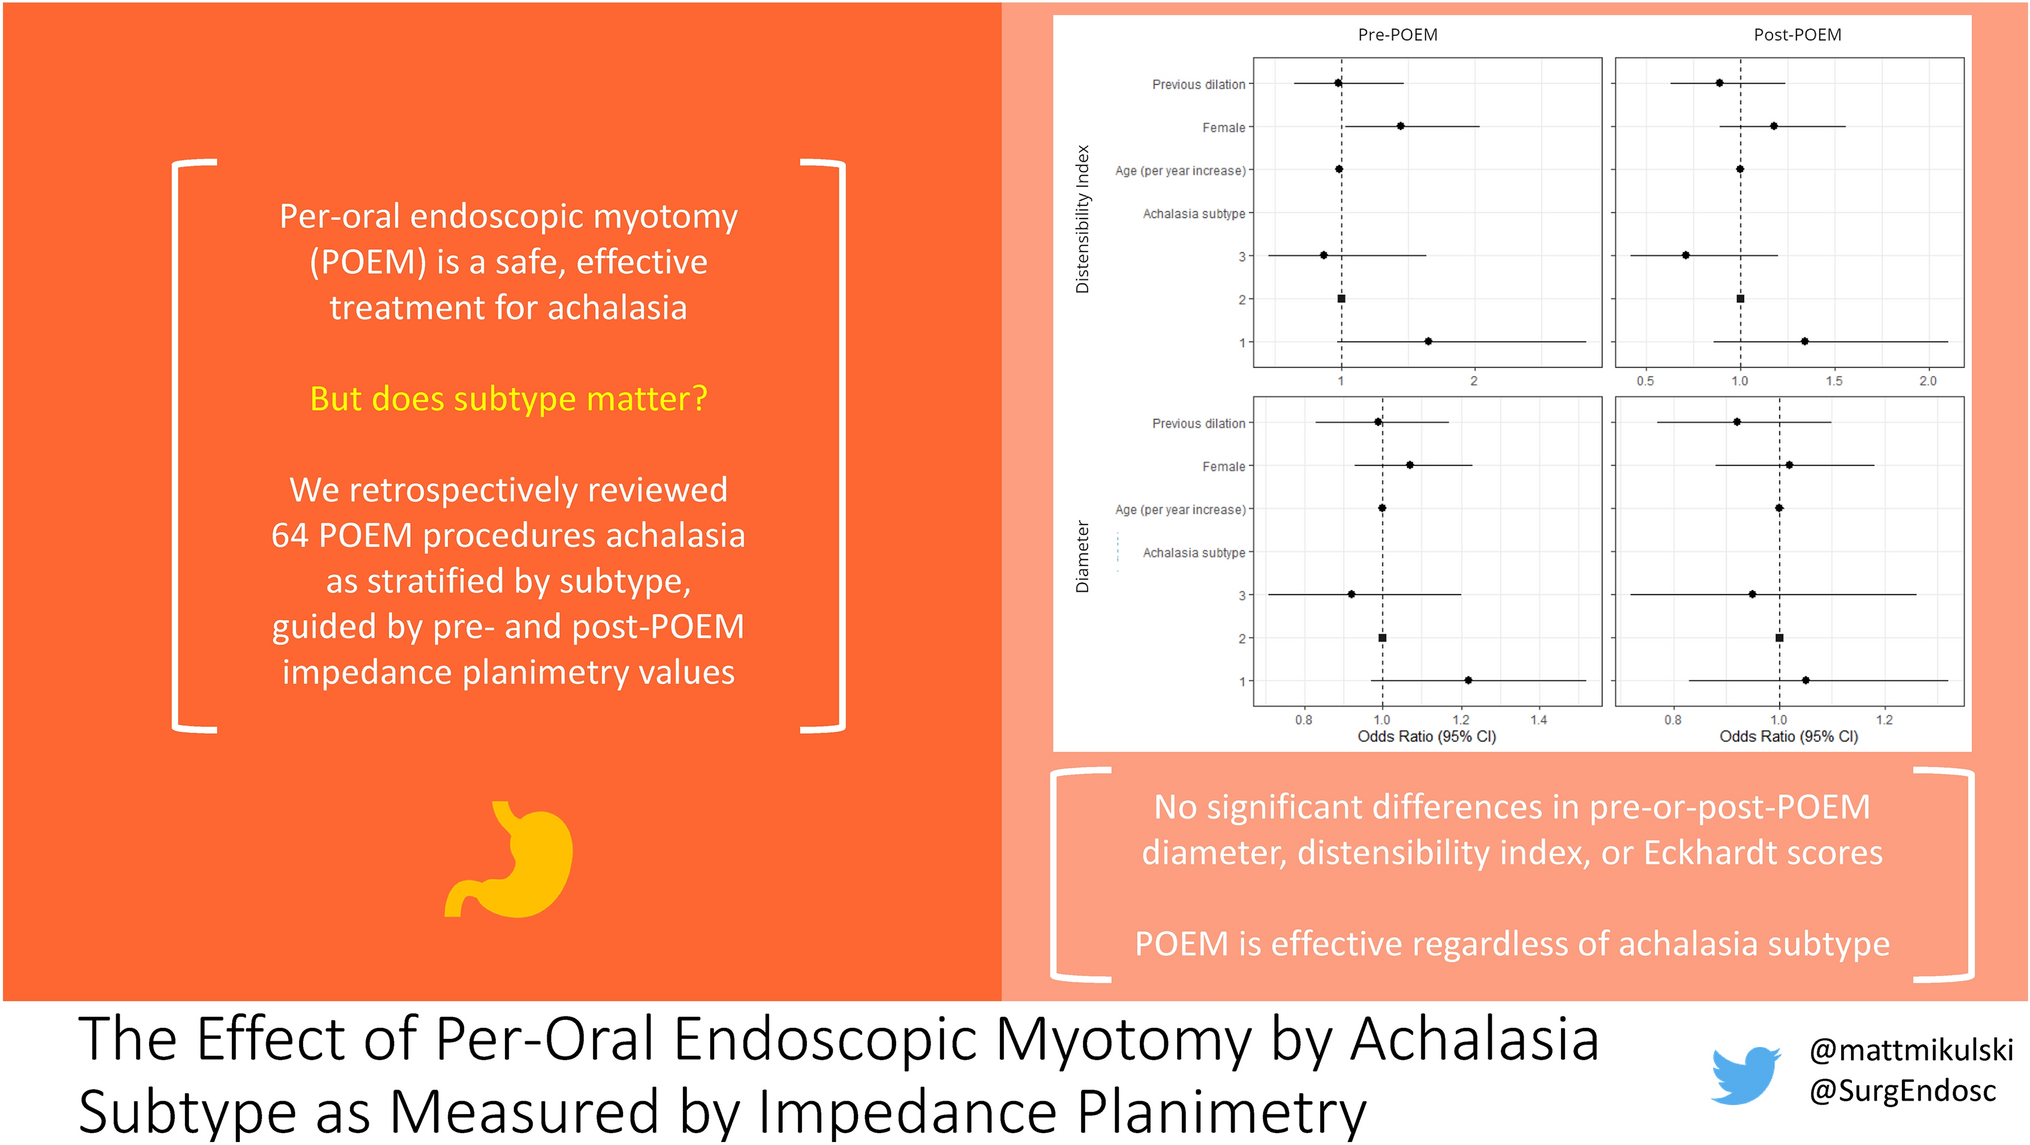 The effect of per-oral endoscopic myotomy by achalasia subtype as measured by impedance planimetry